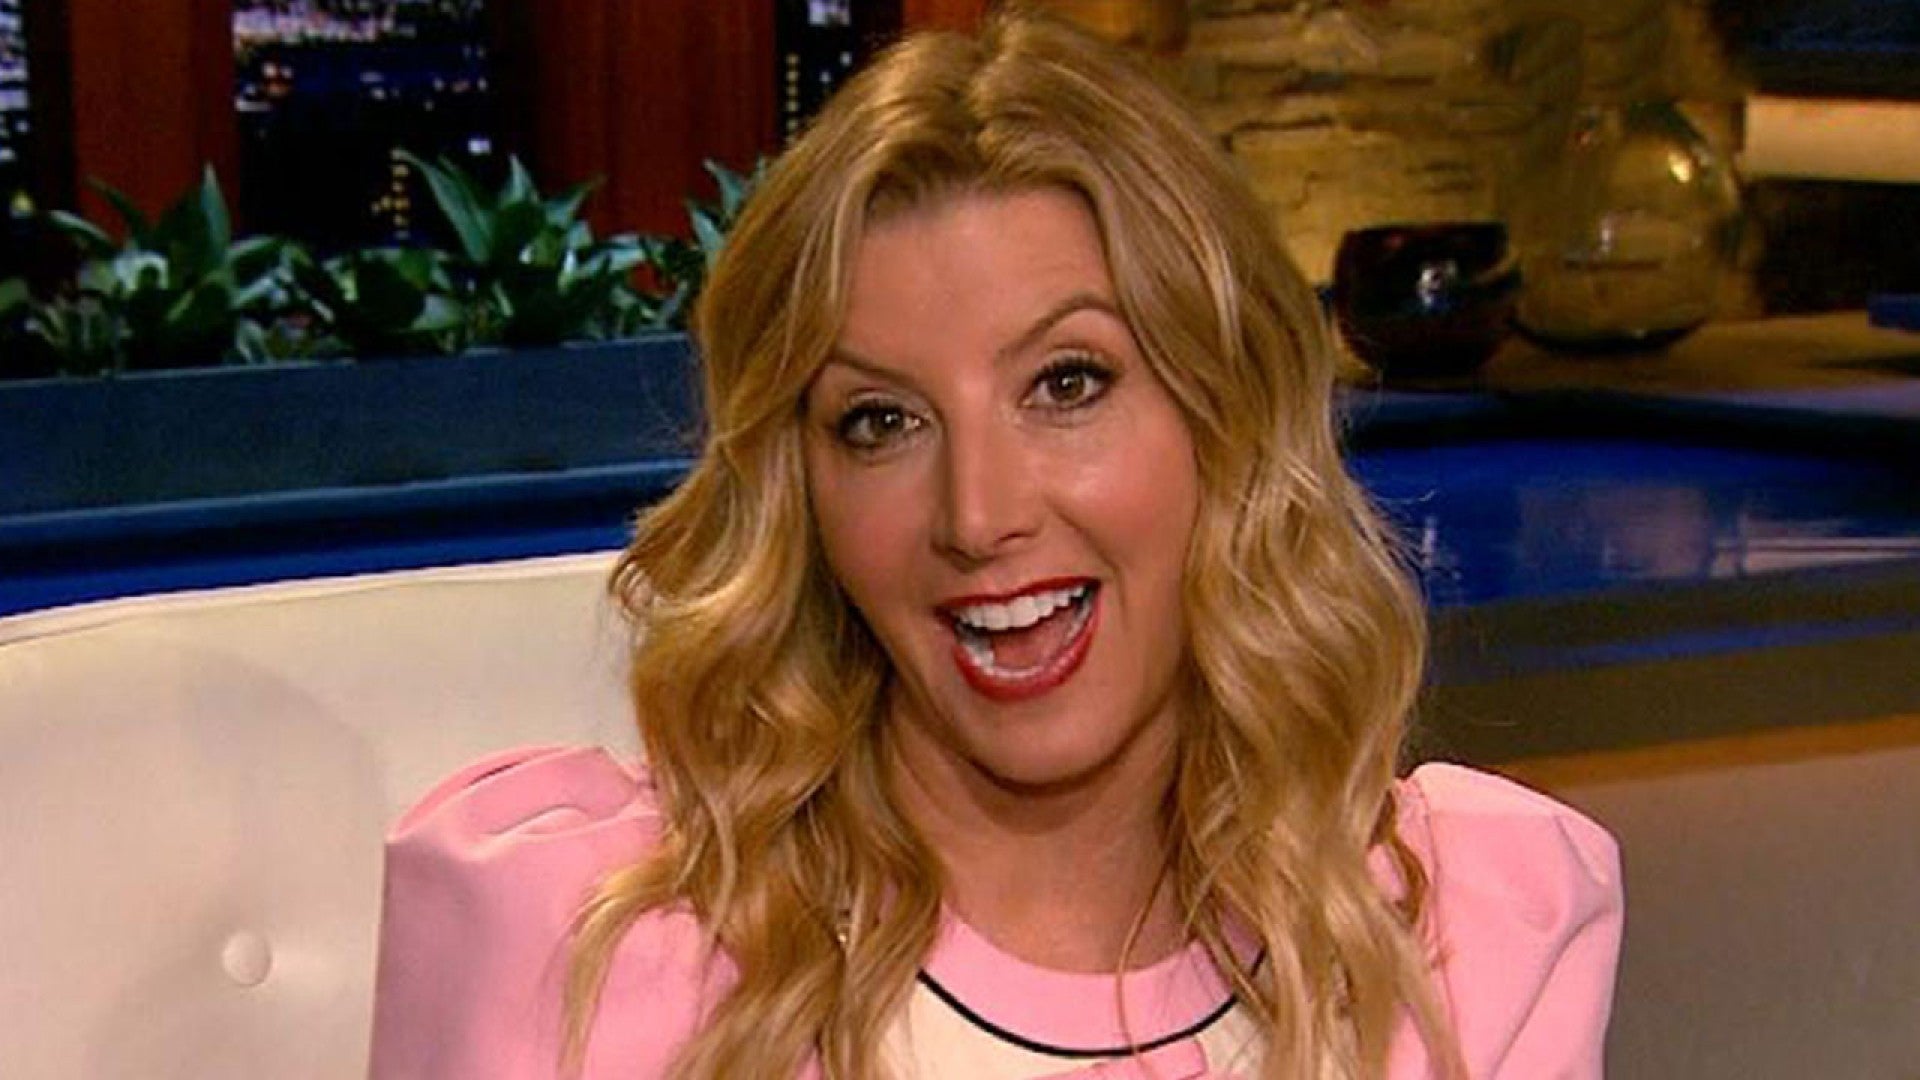 SPANX Founder Sara Blakely on Joining 'Shark Tank': 'I Was Flooded